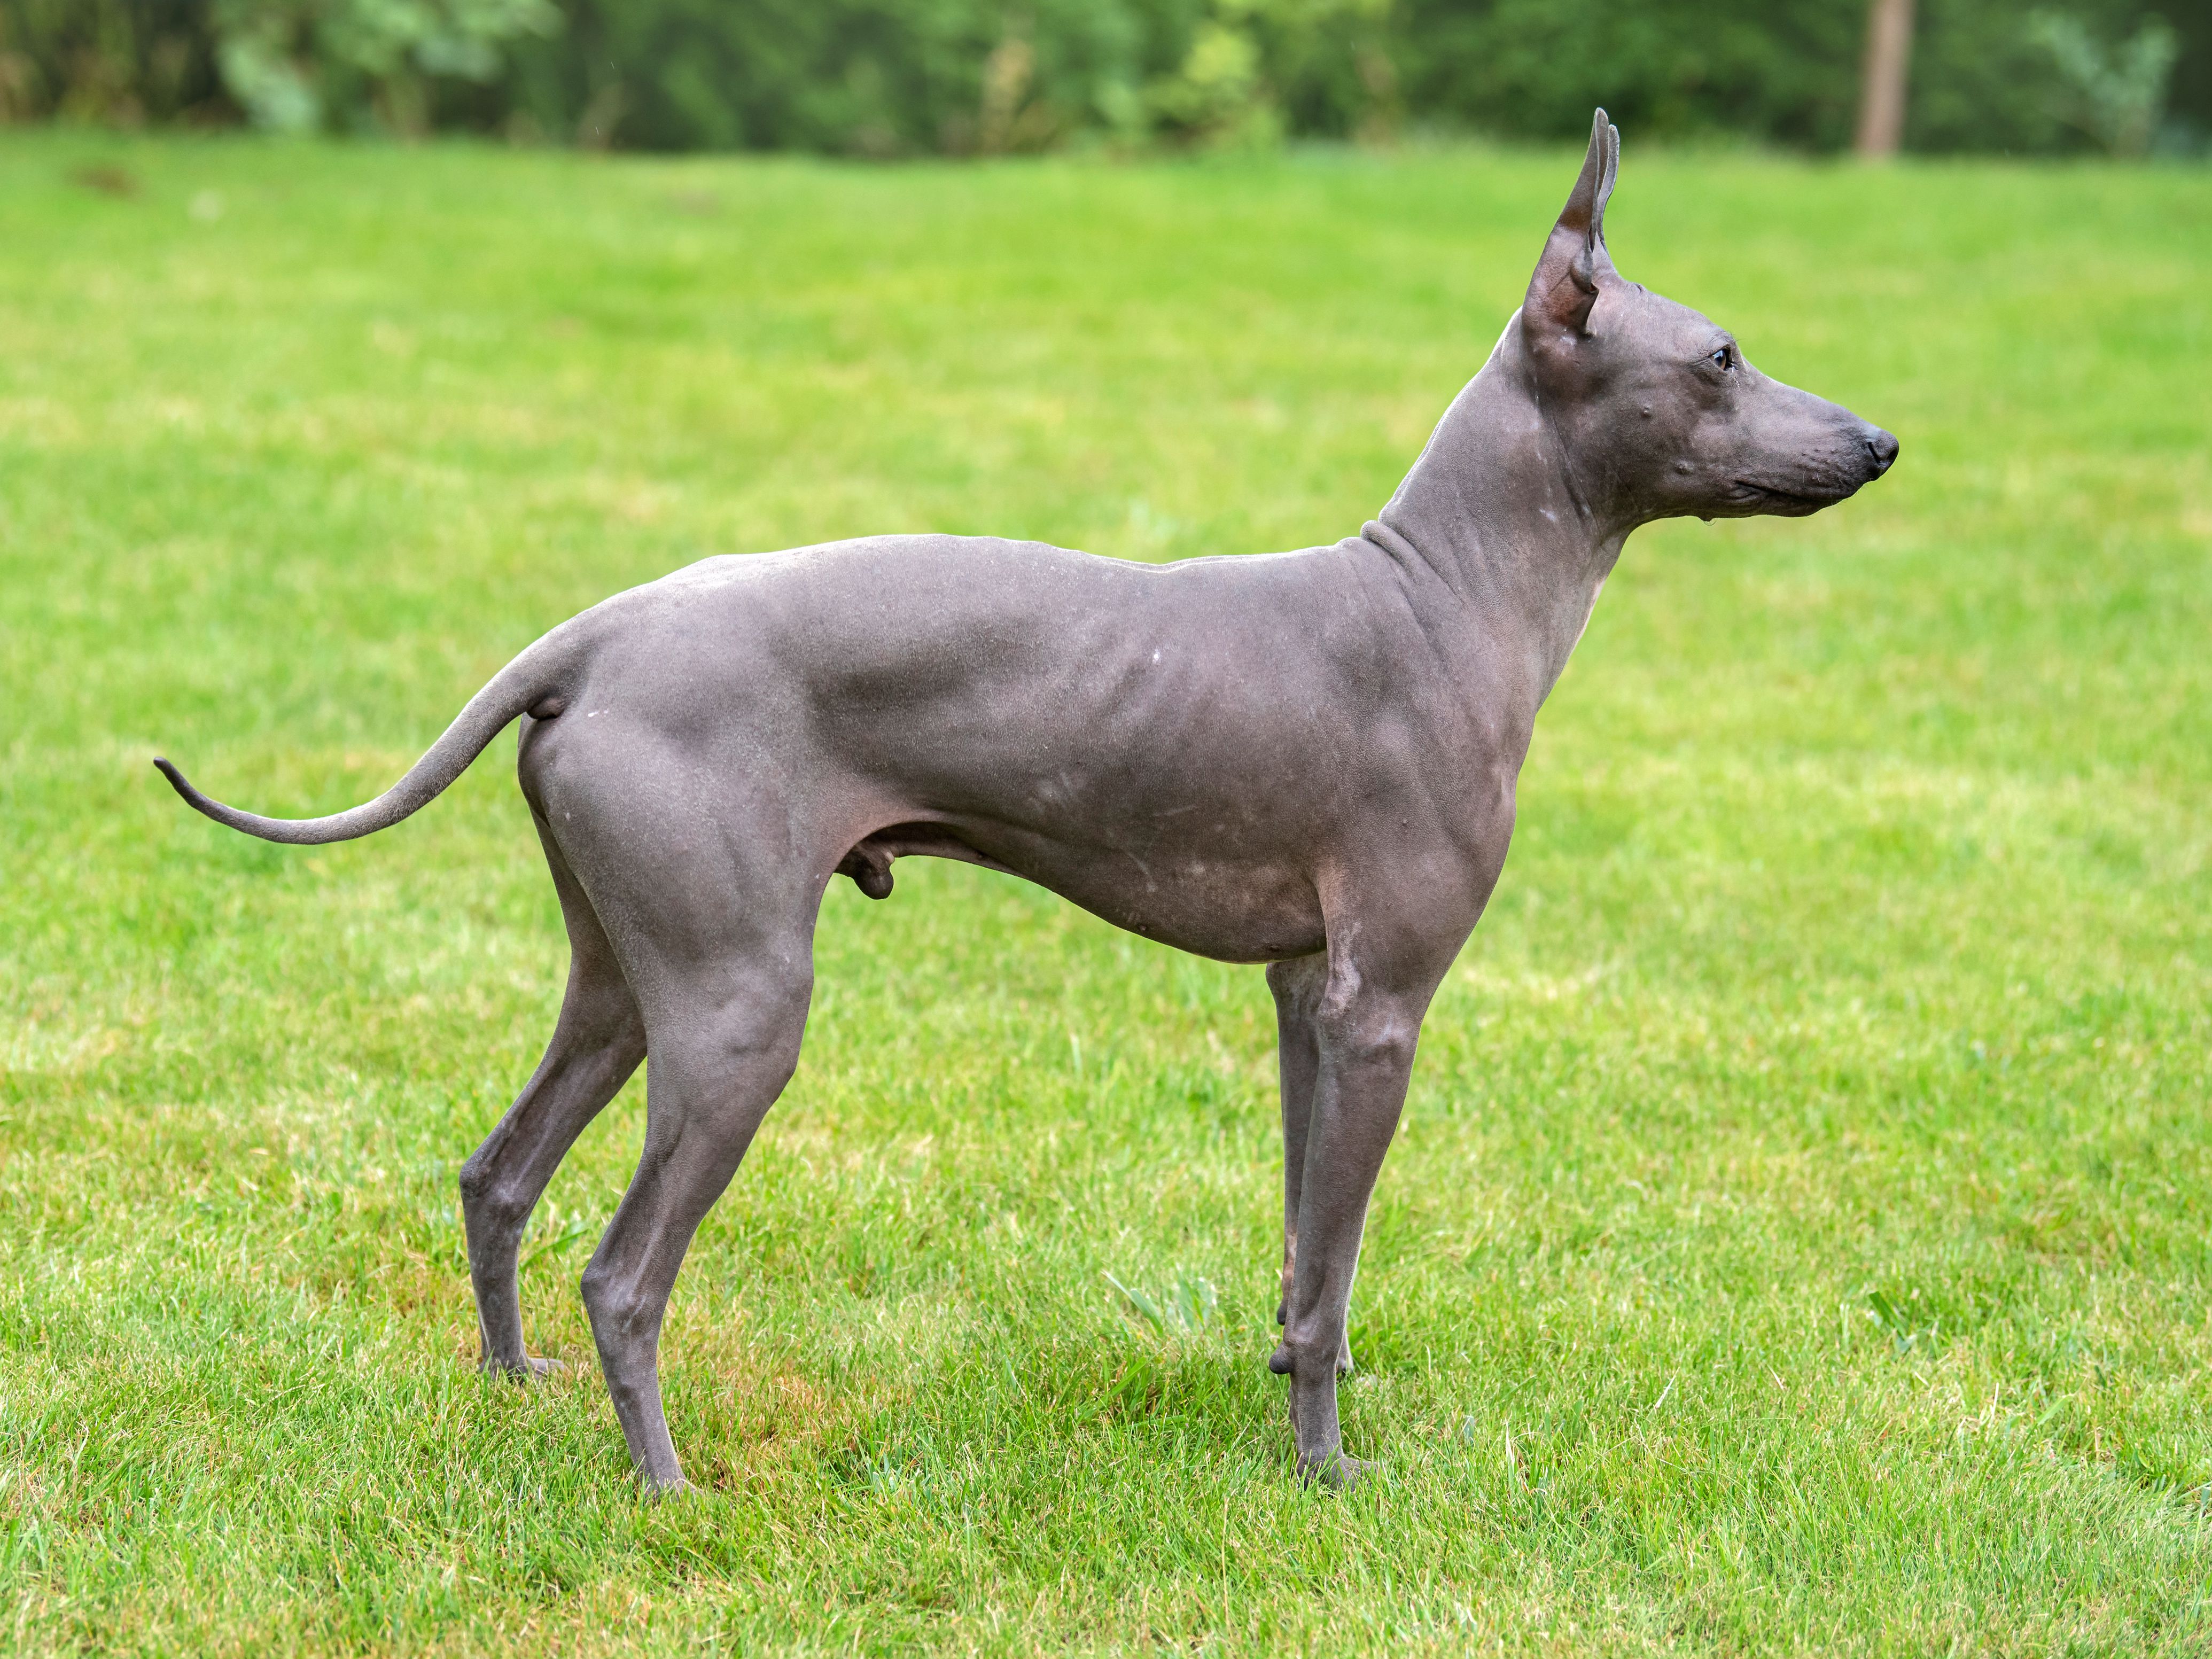 What kind of dog is a hairless dog?